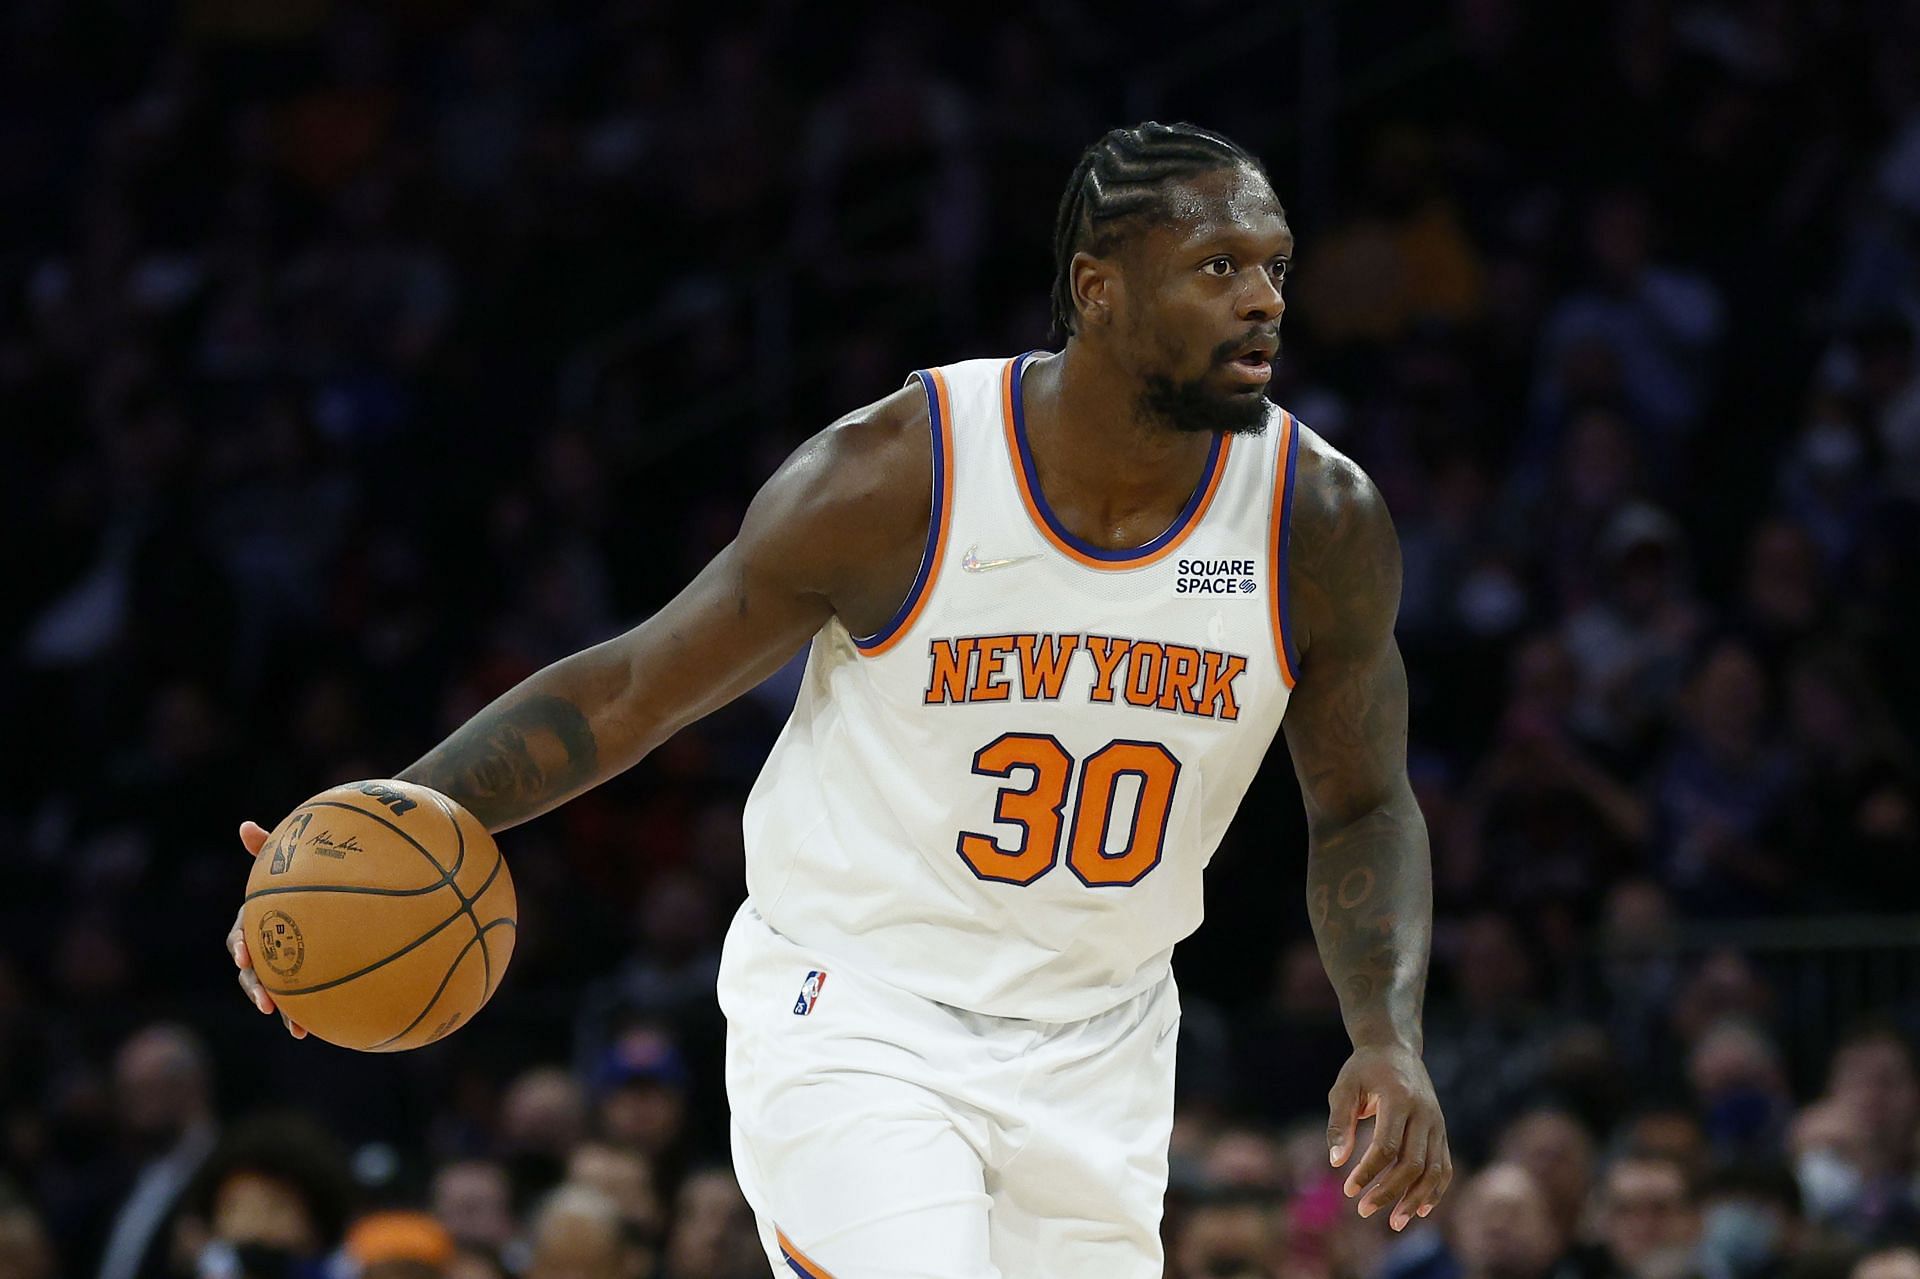 Julius Randle brings the ball up for the New York Knicks